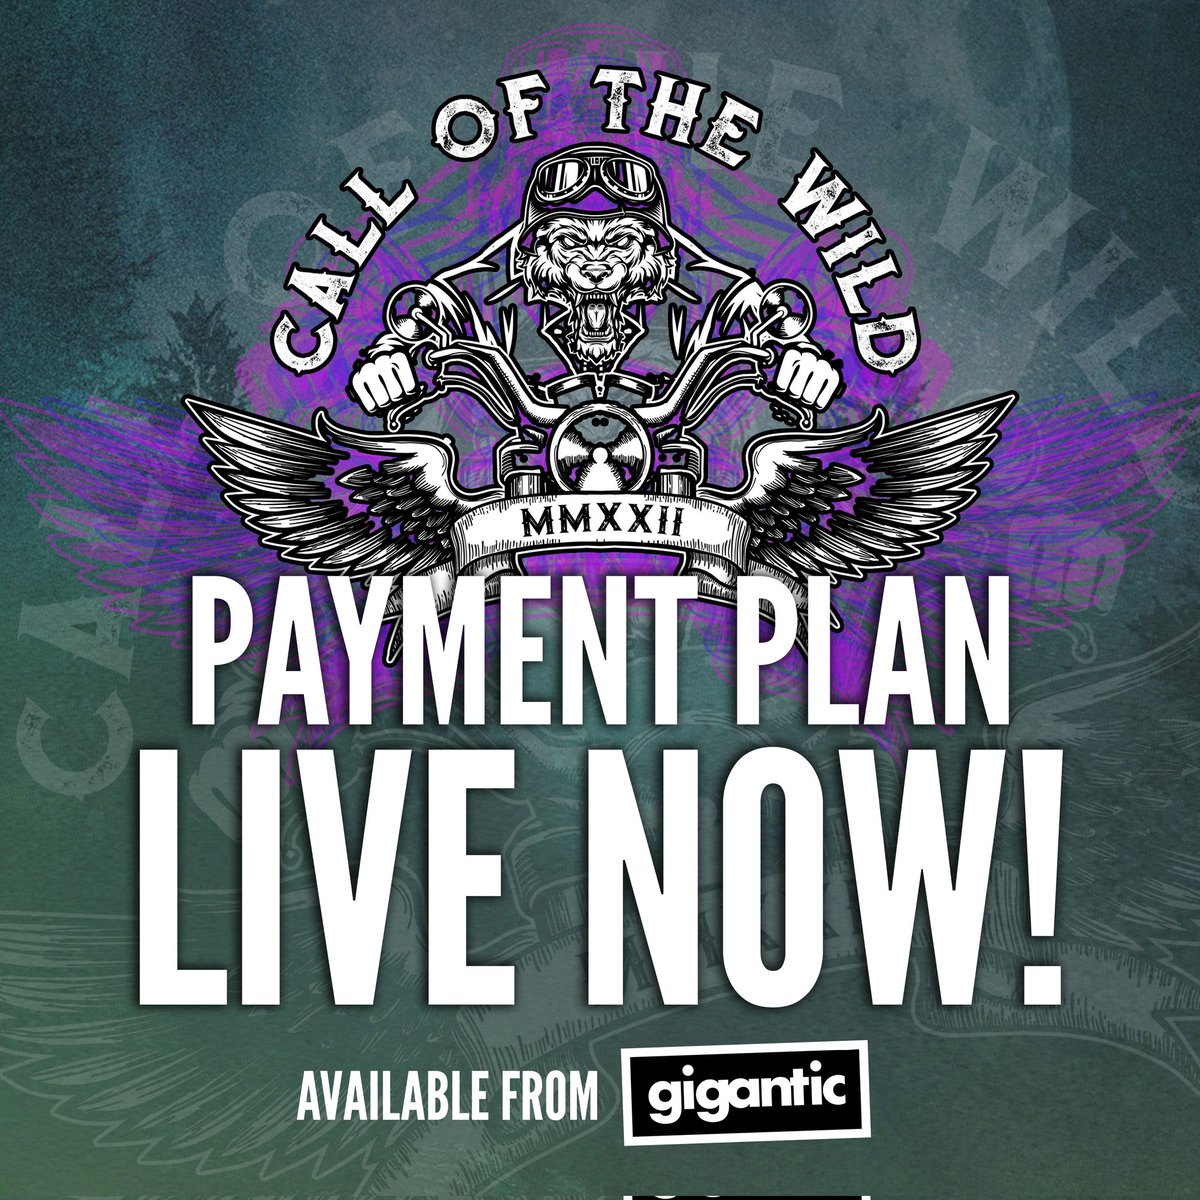 Book Now with a small deposit and spread cost over several months! #COTW2022 #callofthewildfestival #Lincoln #Lincolnshire #paymentplan #deposit #rockfest #festival